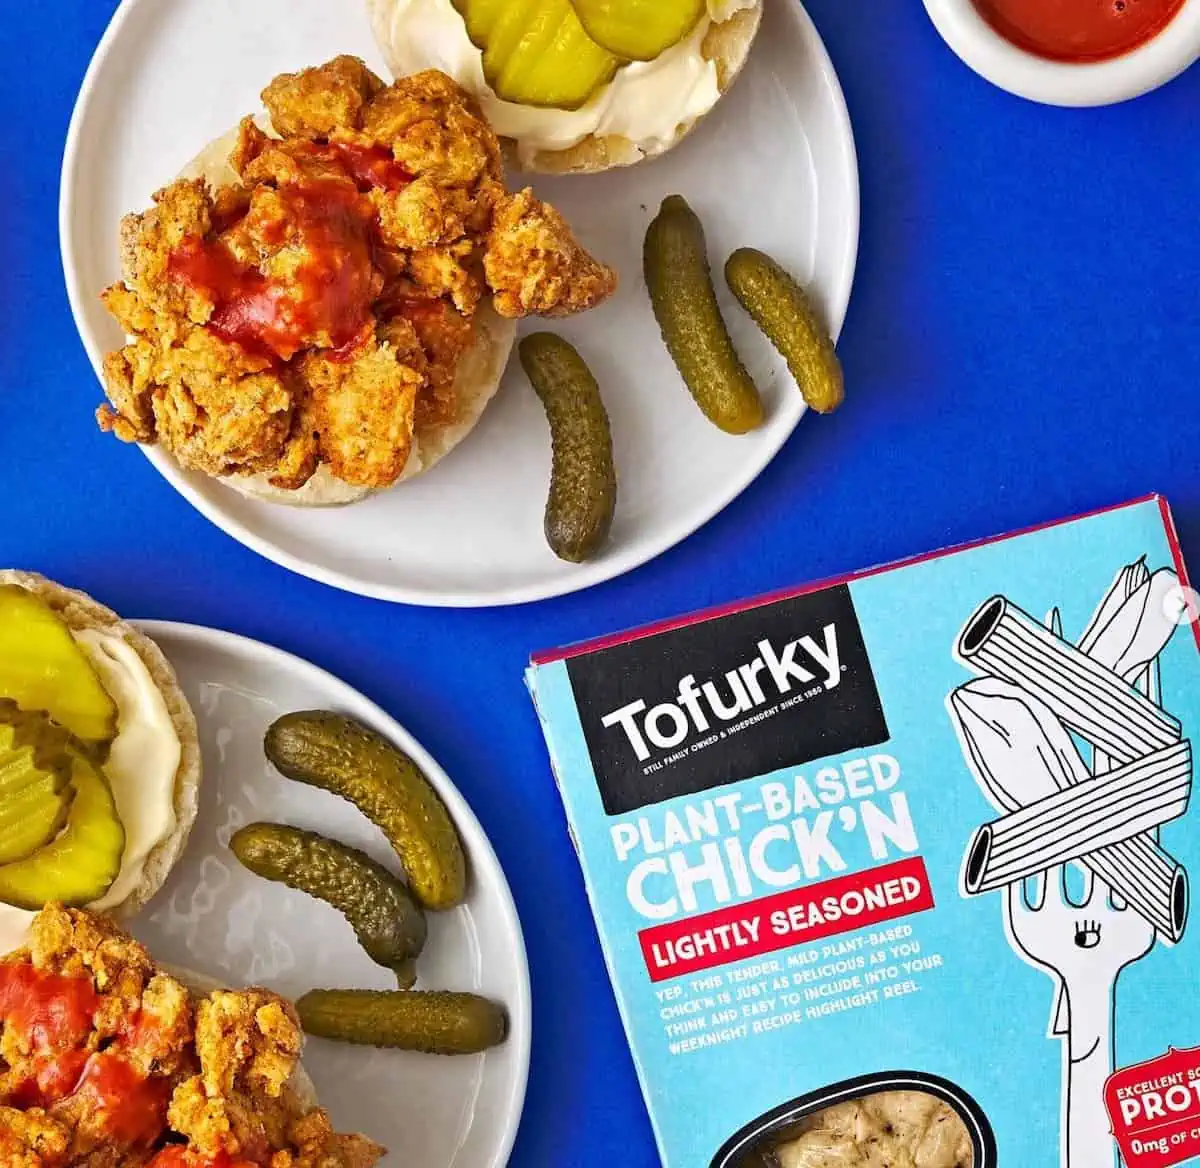 A package of Tofurky brand plant-based chicken on sandwiches.